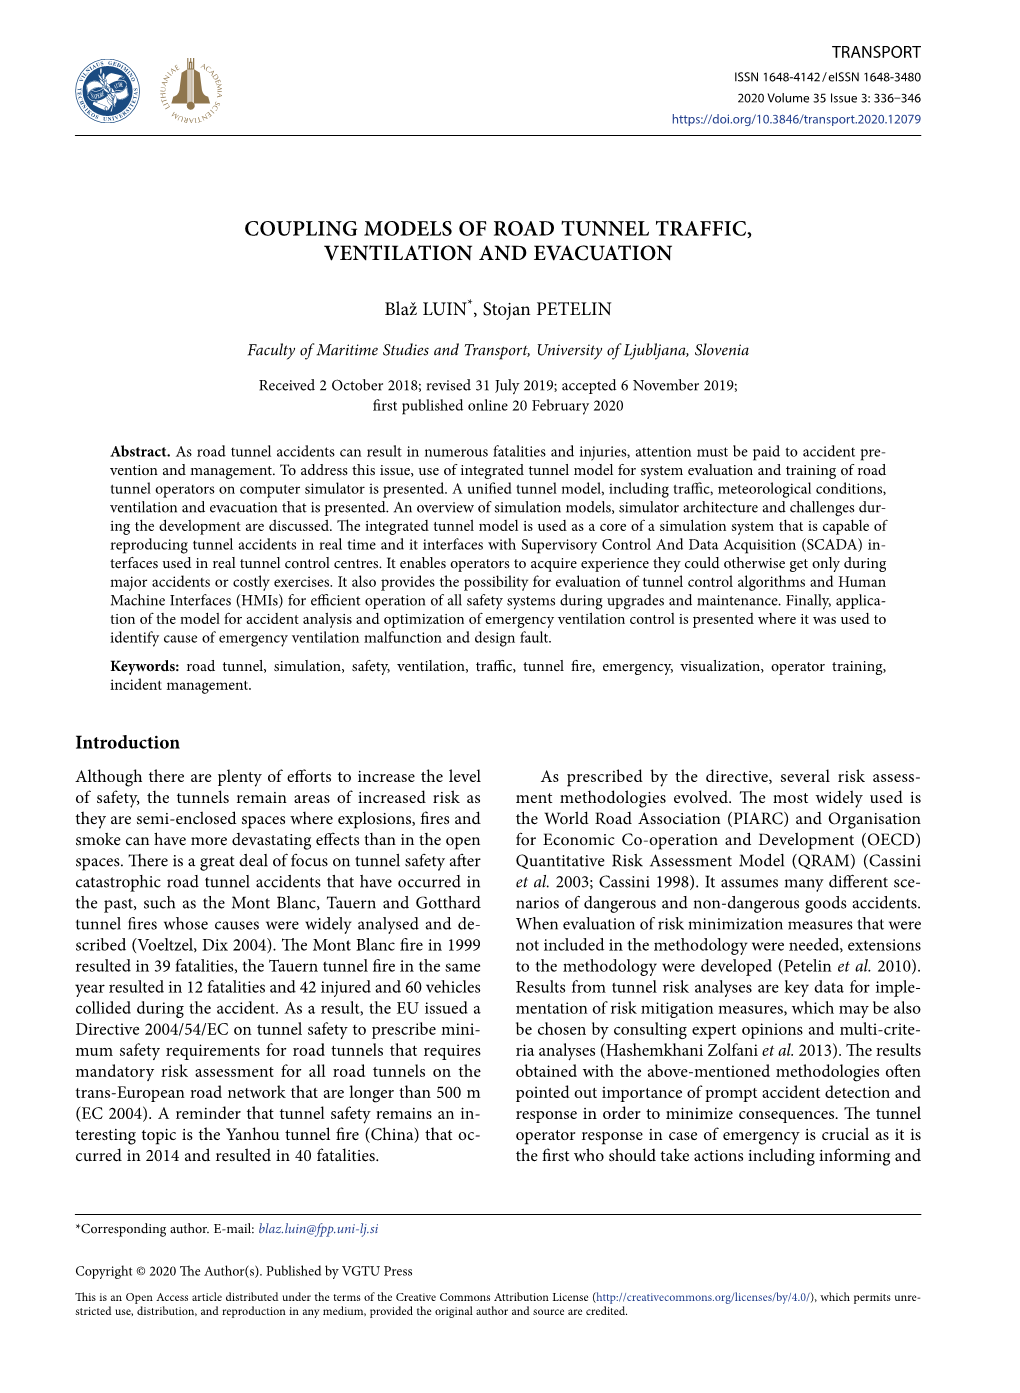 Coupling Models of Road Tunnel Traffic, Ventilation and Evacuation